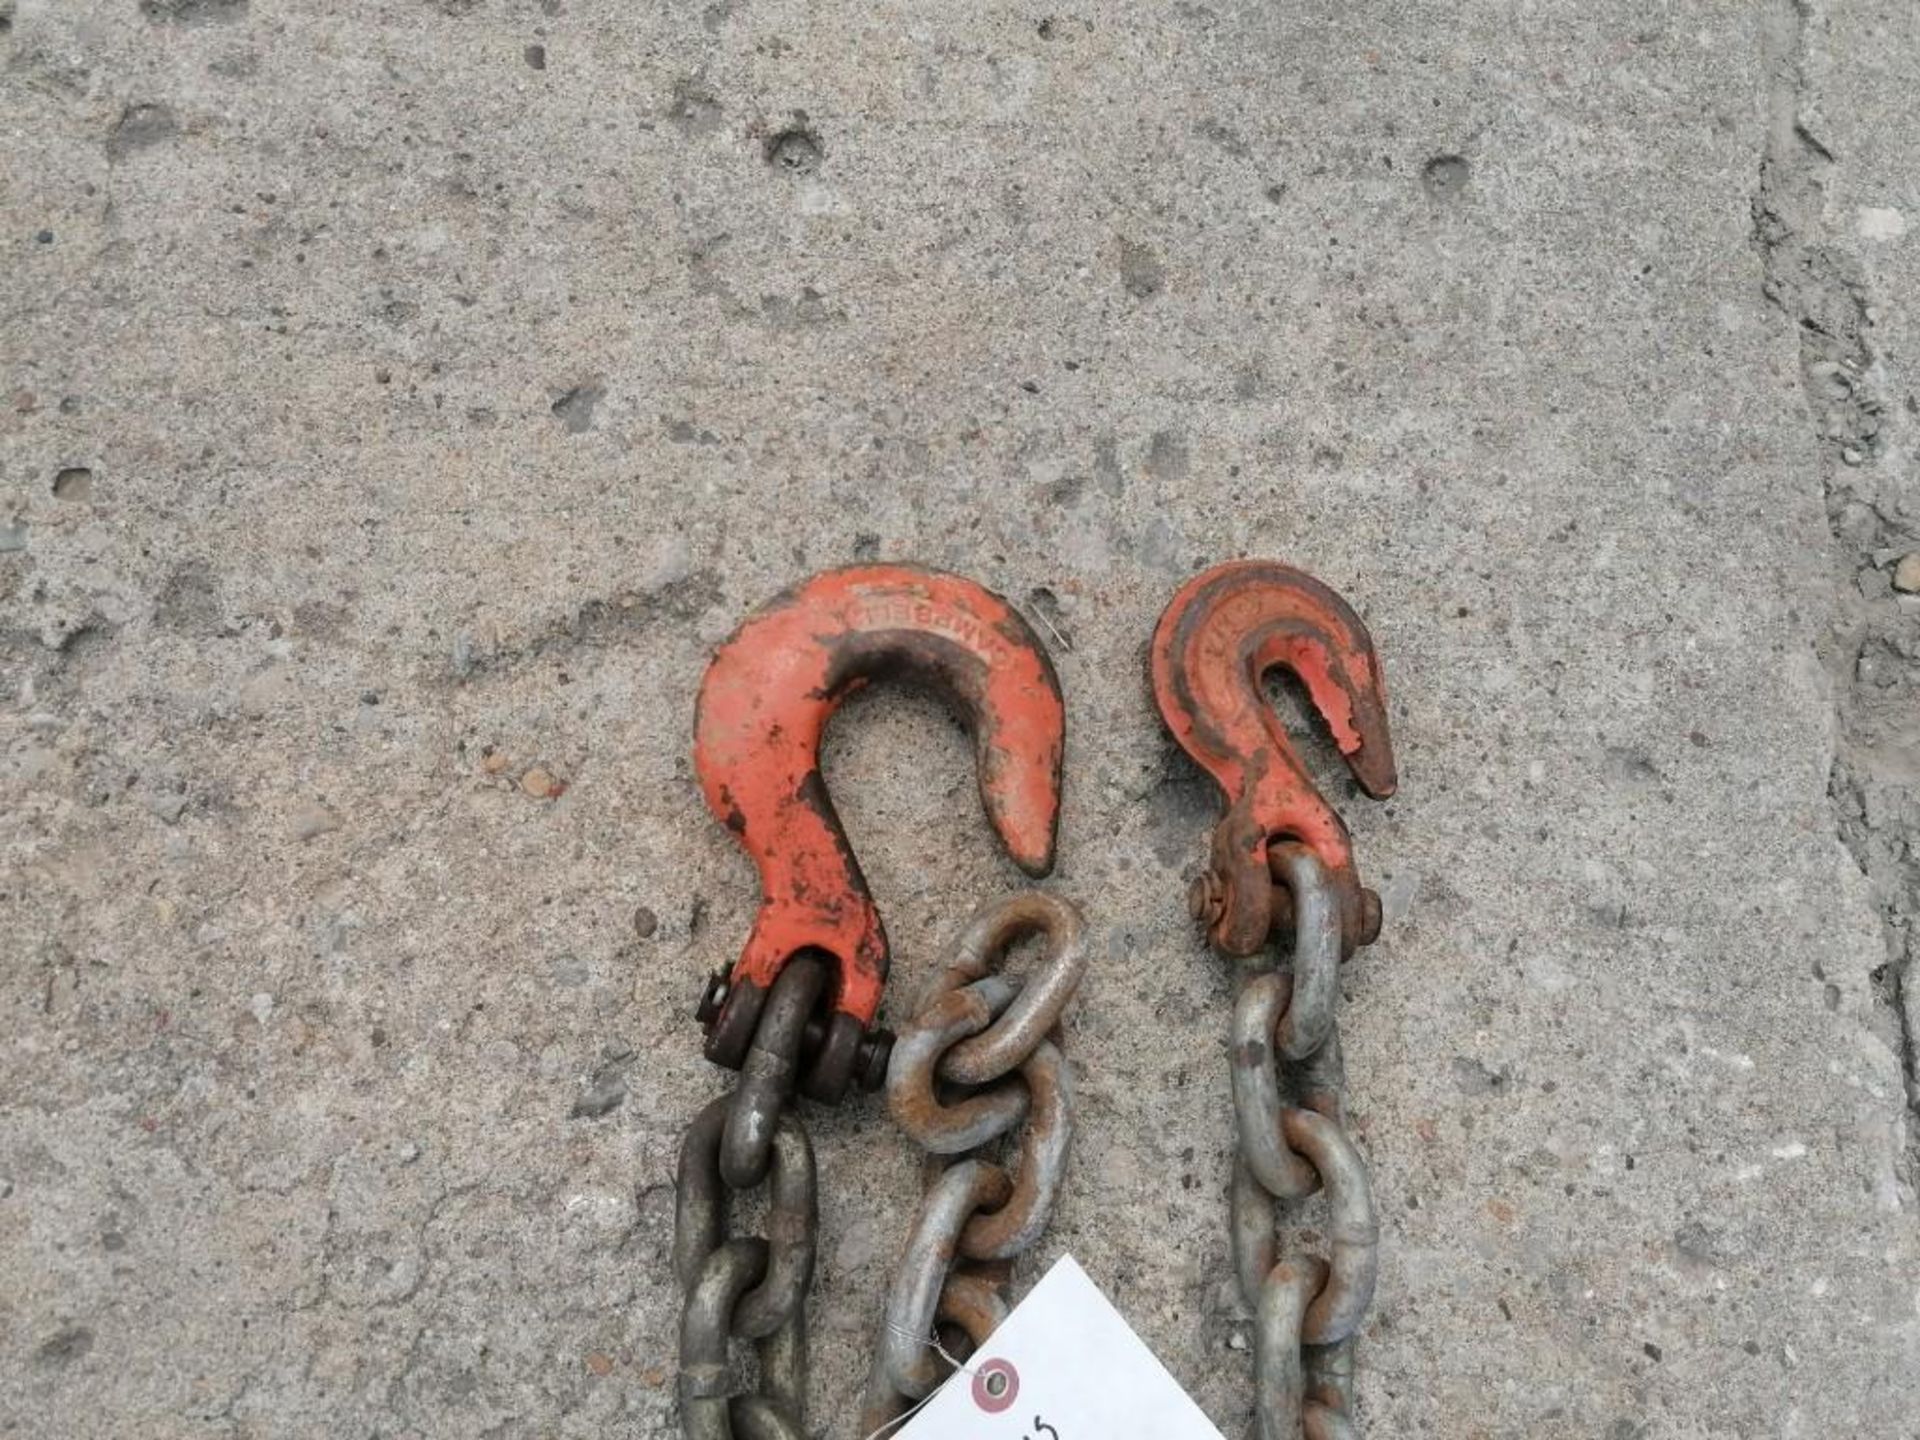 (3) 1/2" USA 4' & (1) 1/2" USA 2' Chain with Hook. Located at 301 E Henry Street, Mt. Pleasant, IA - Image 3 of 4